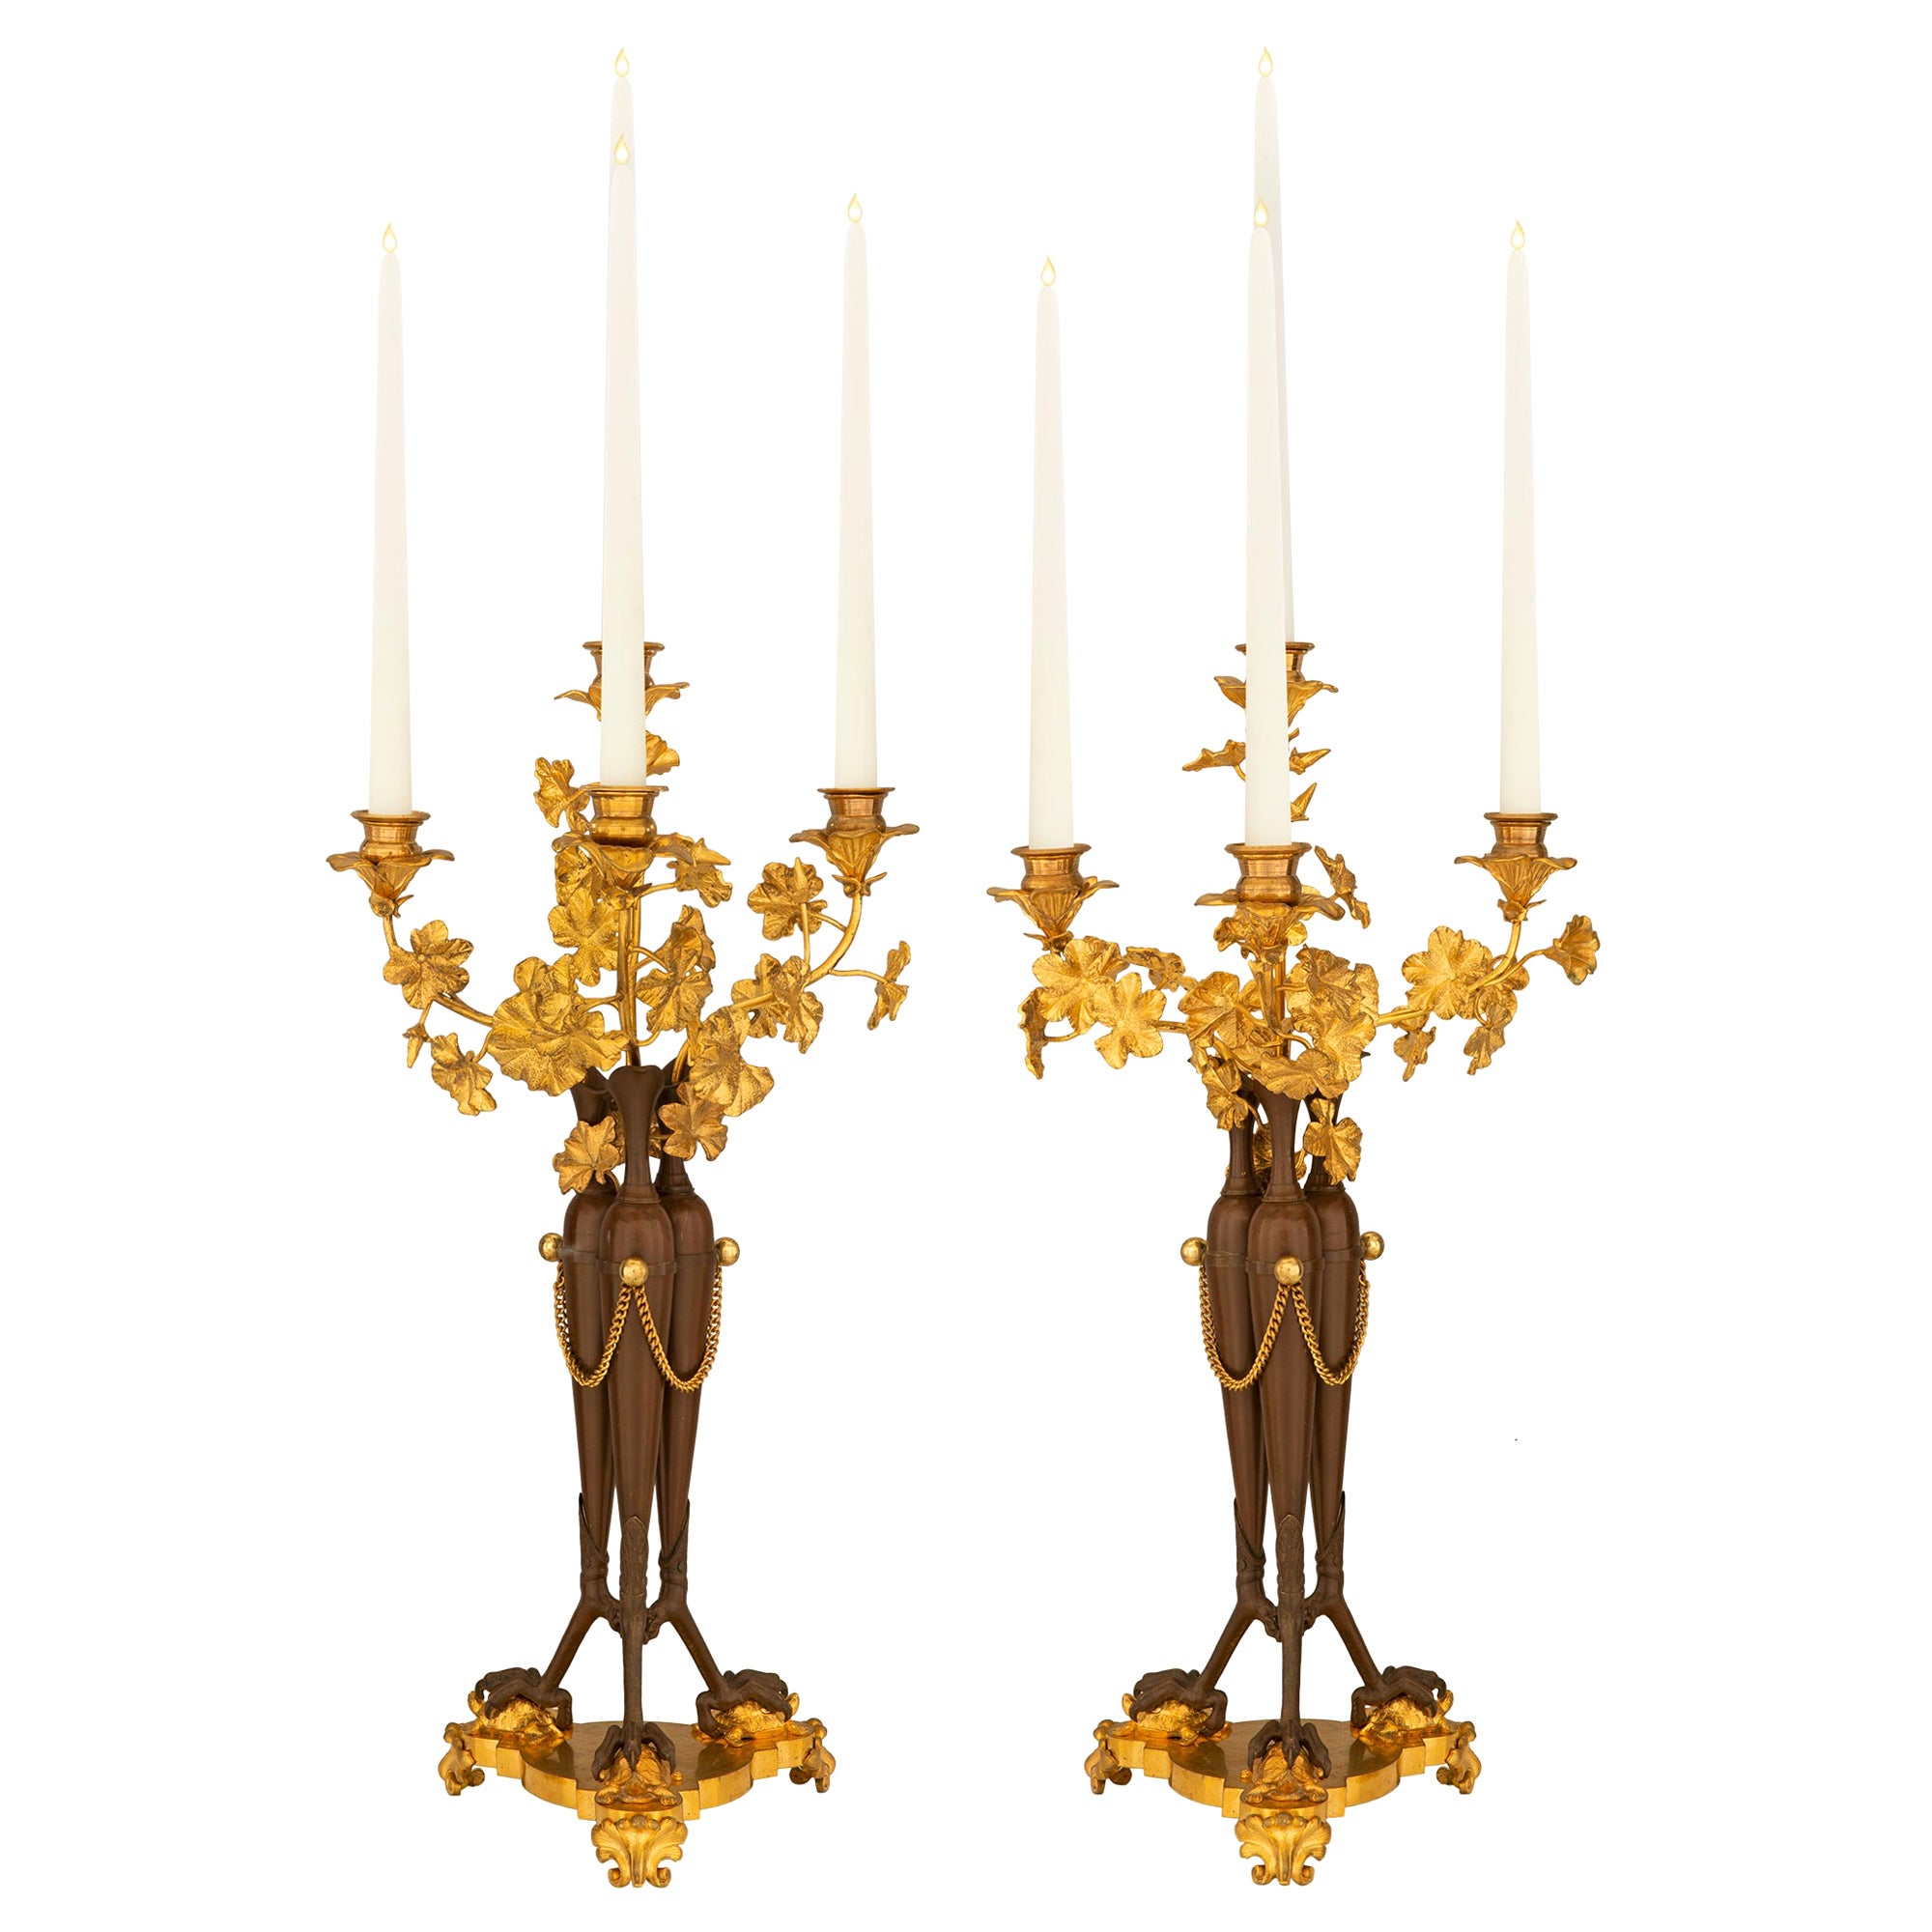 Pair of French 19th Century Neoclassical St. Bronze and Ormolu Candelabras